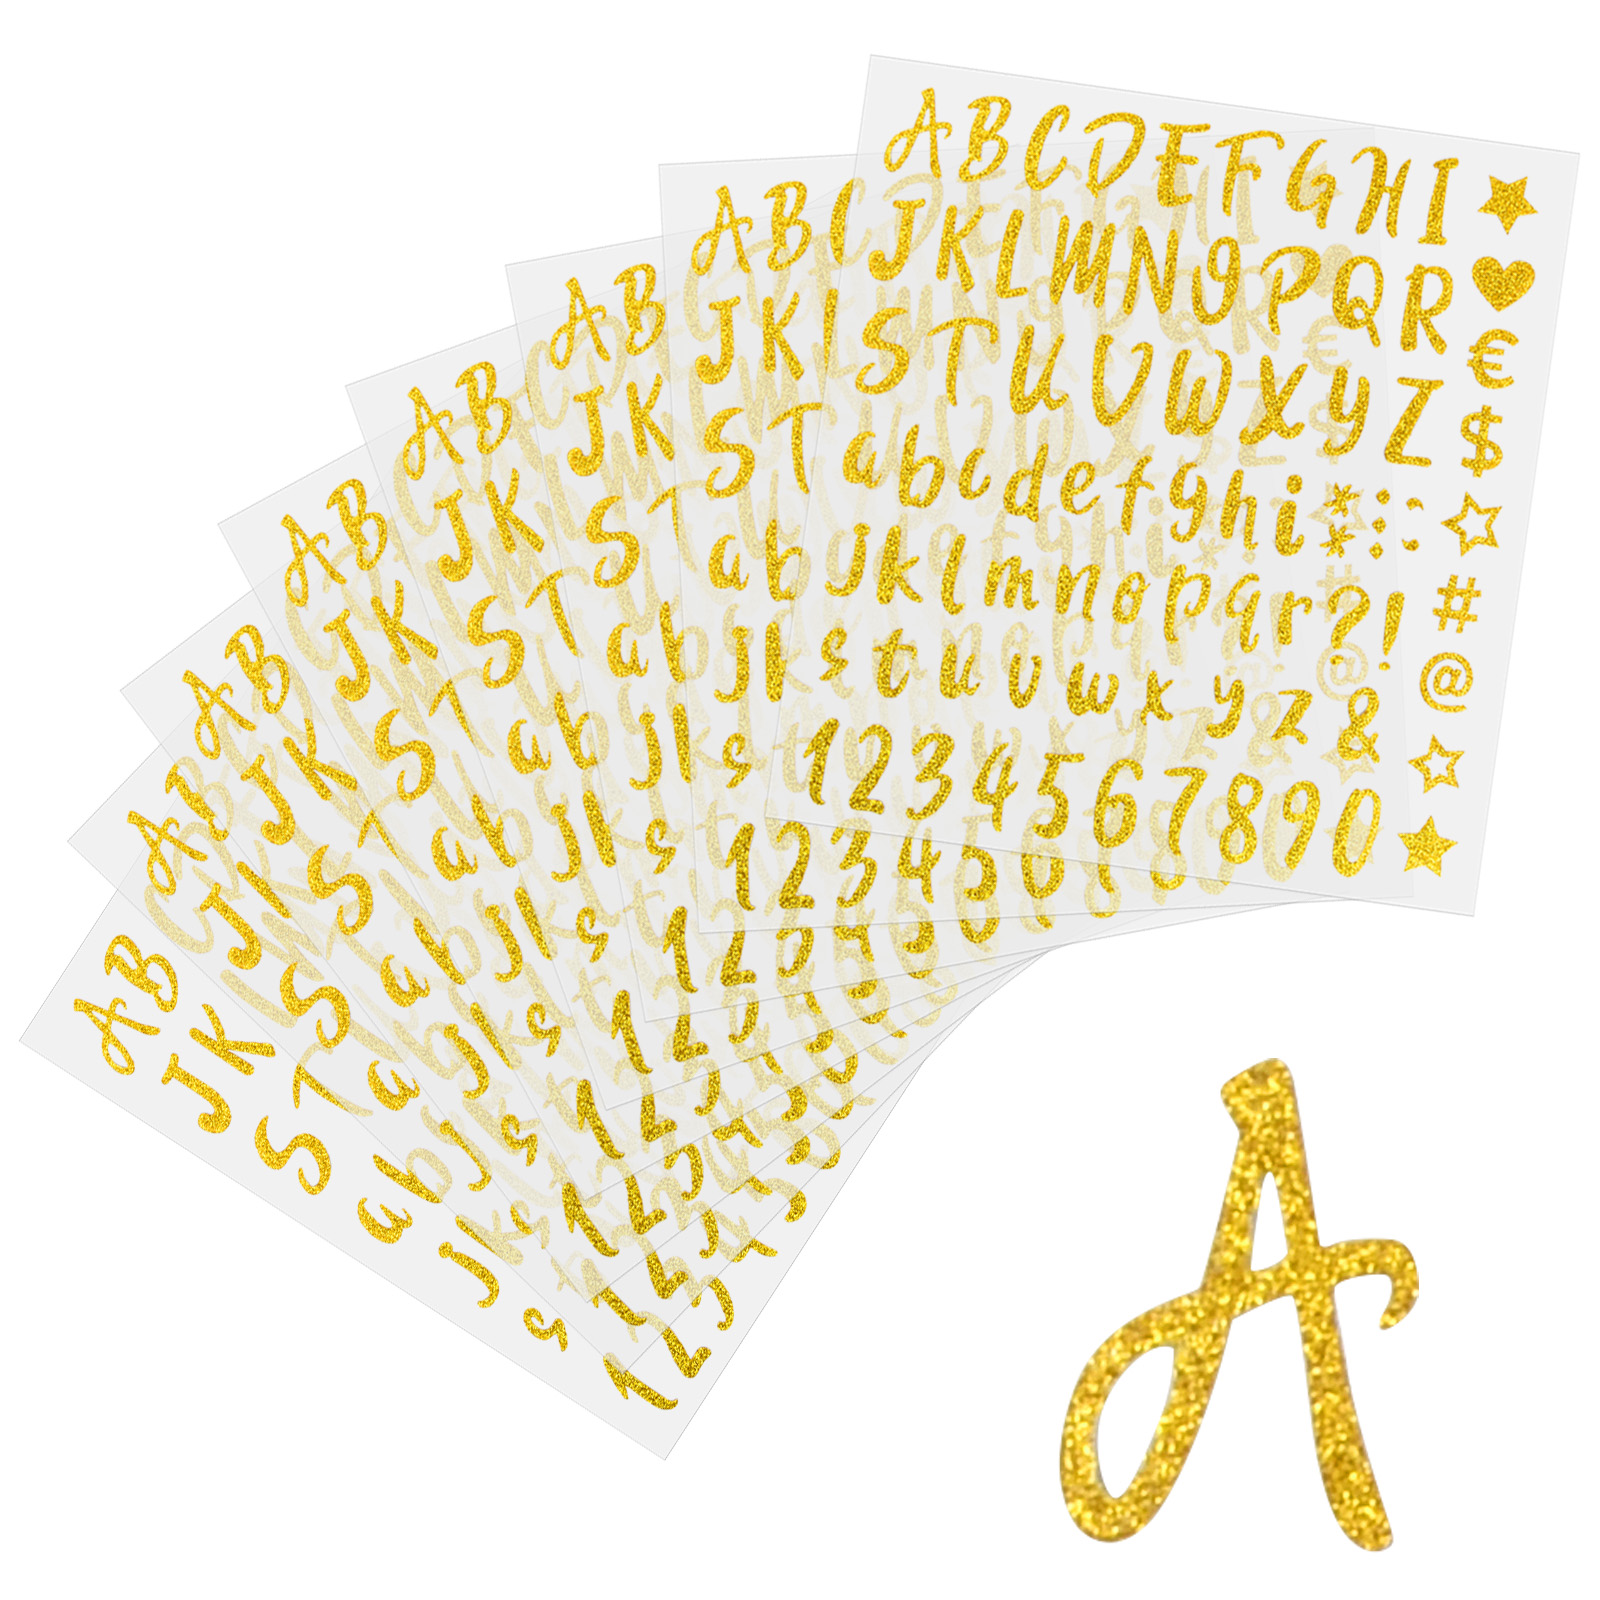 LETERS Glitter BIG Alphabet Letter Stickers Self Adhesive DIY A4